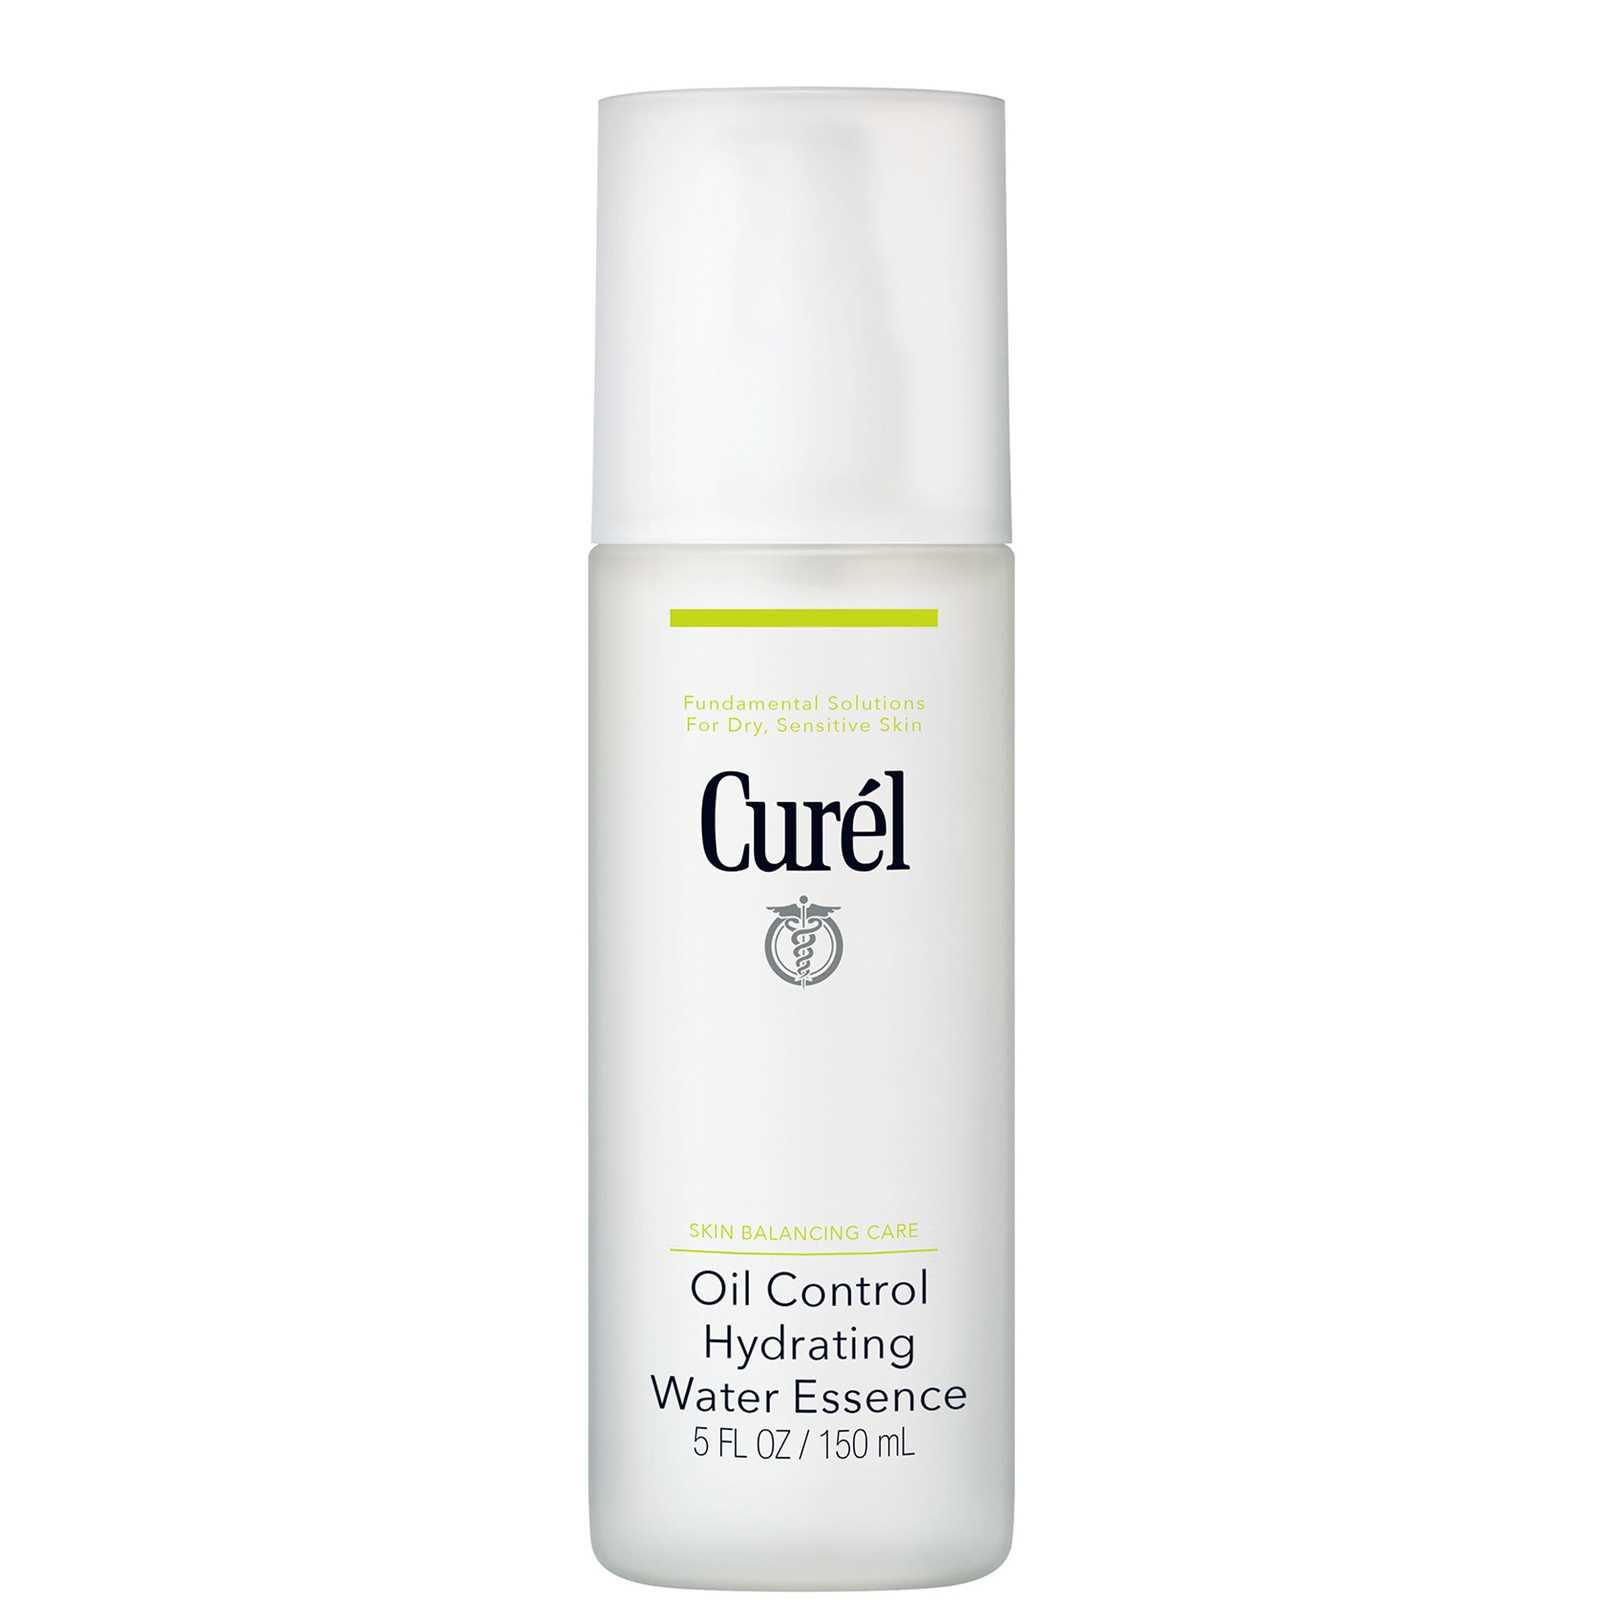 Image of Curél Skin Balancing Care Oil Control Hydrating Water Essence for Sensitive Skin 150ml